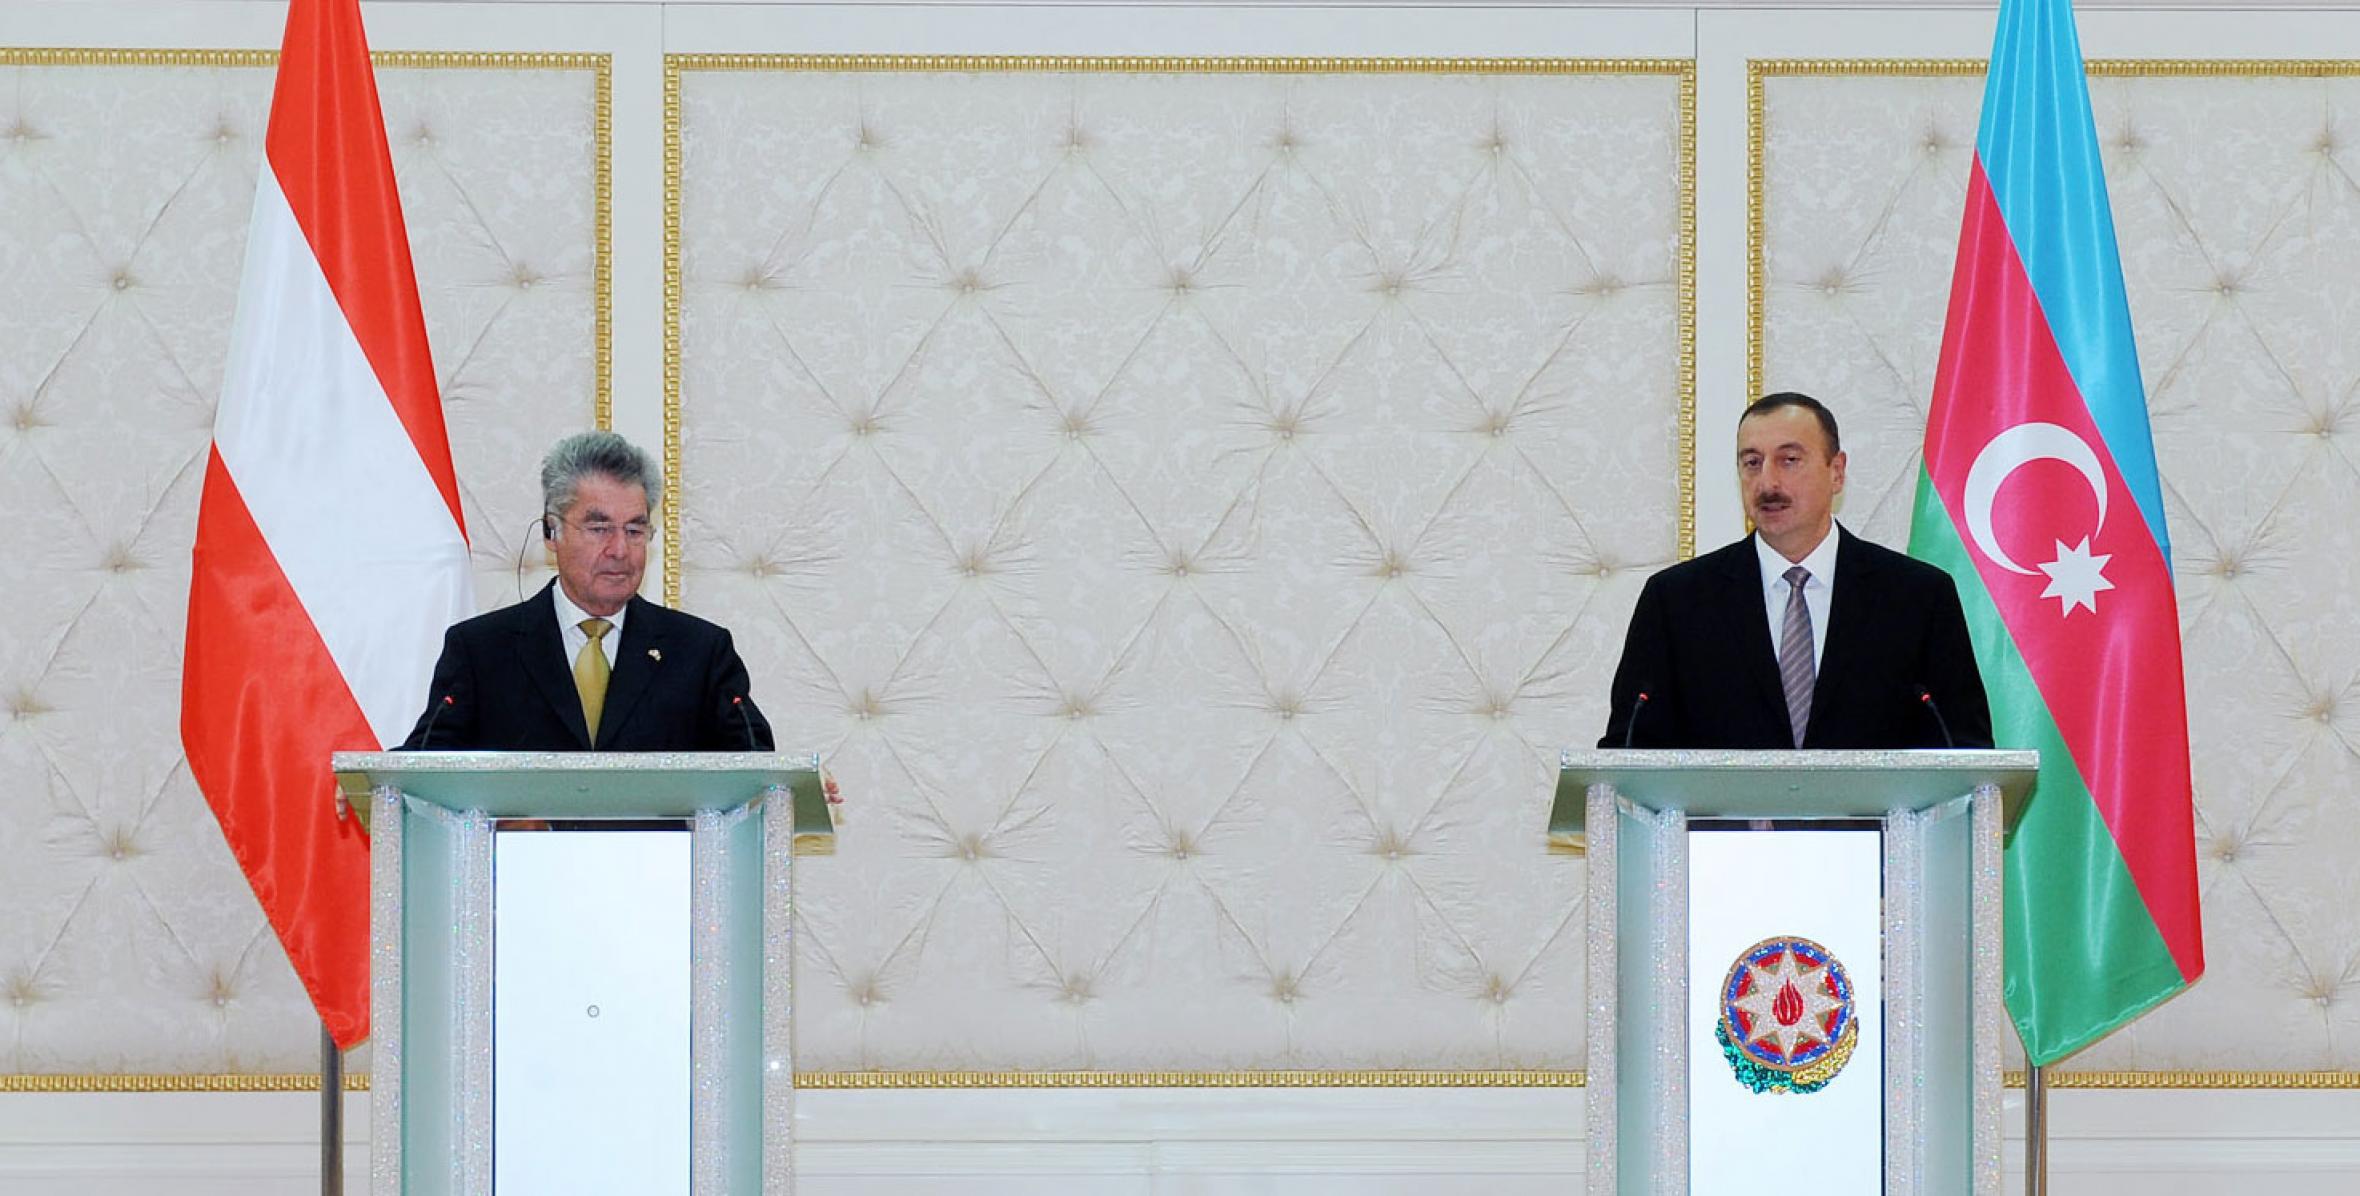 Presidents of Azerbaijan and Austria held a press conference